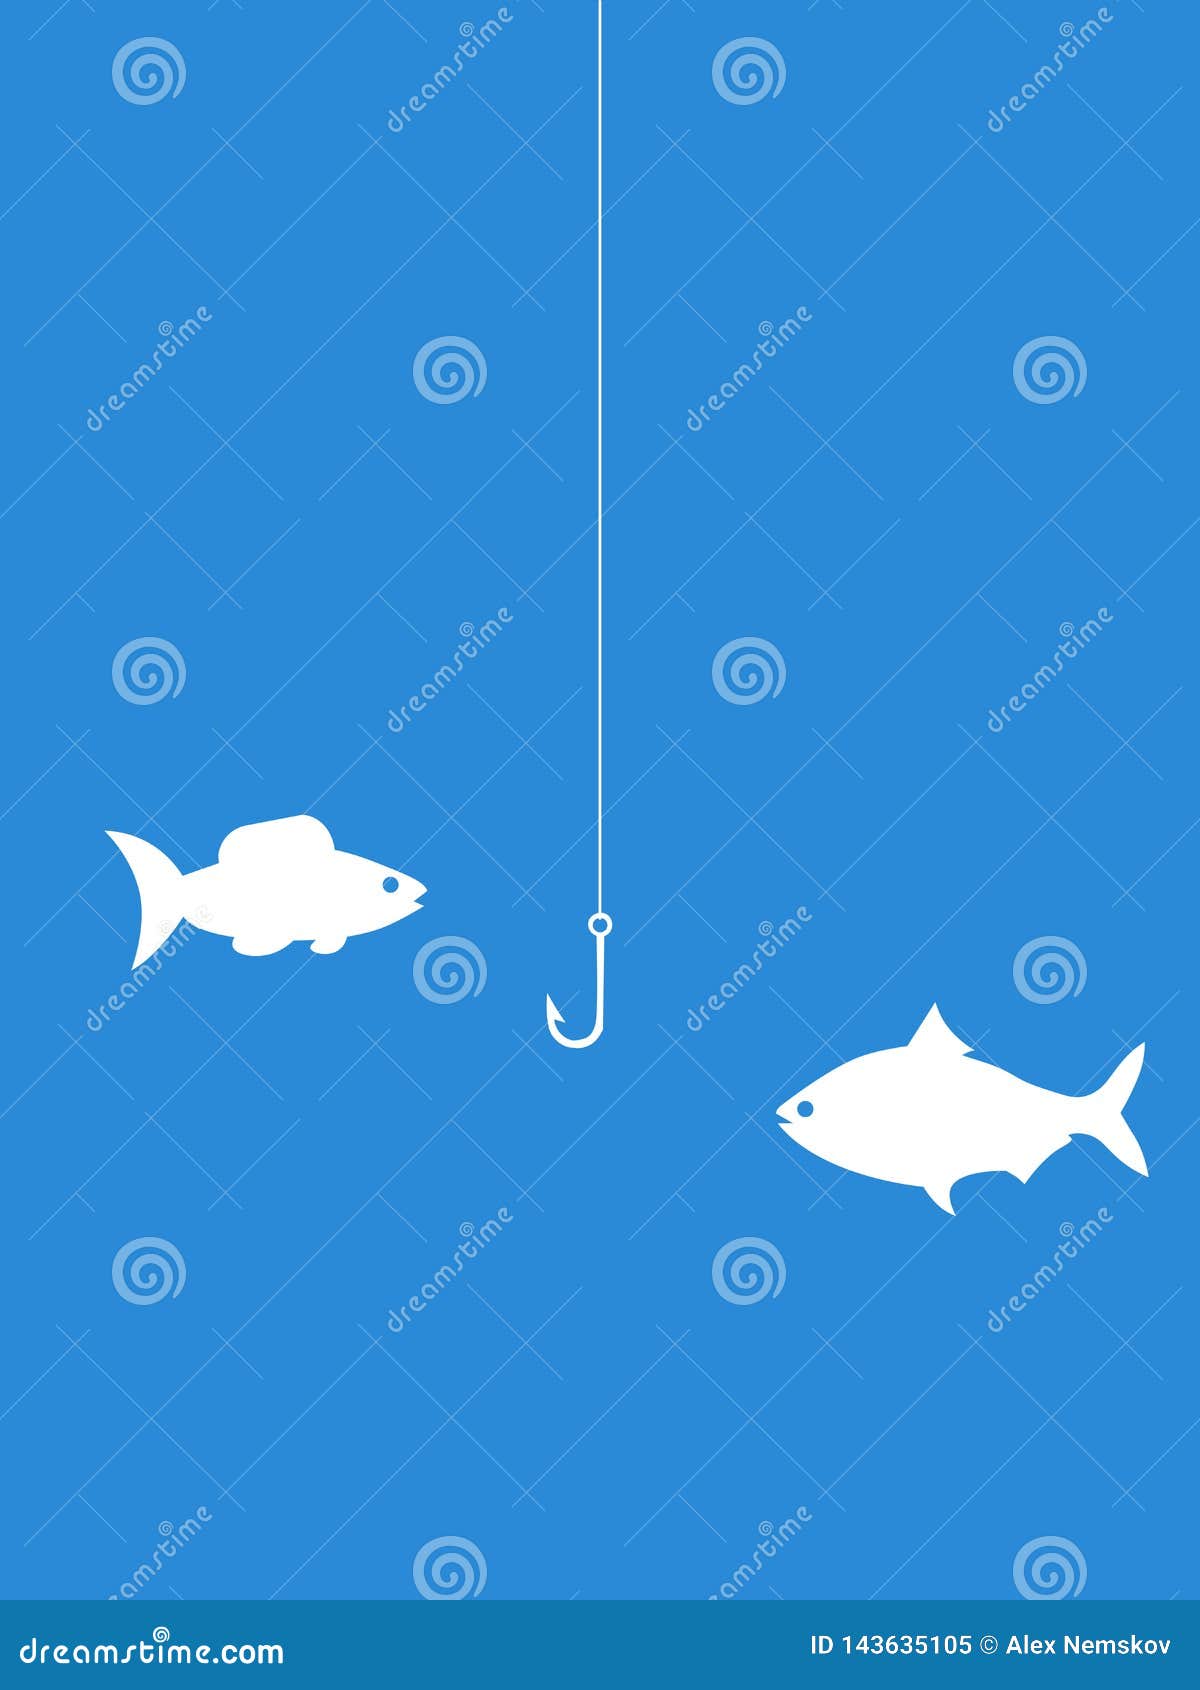 Worm on hook linear icon. Thin line illustration. Fishing live